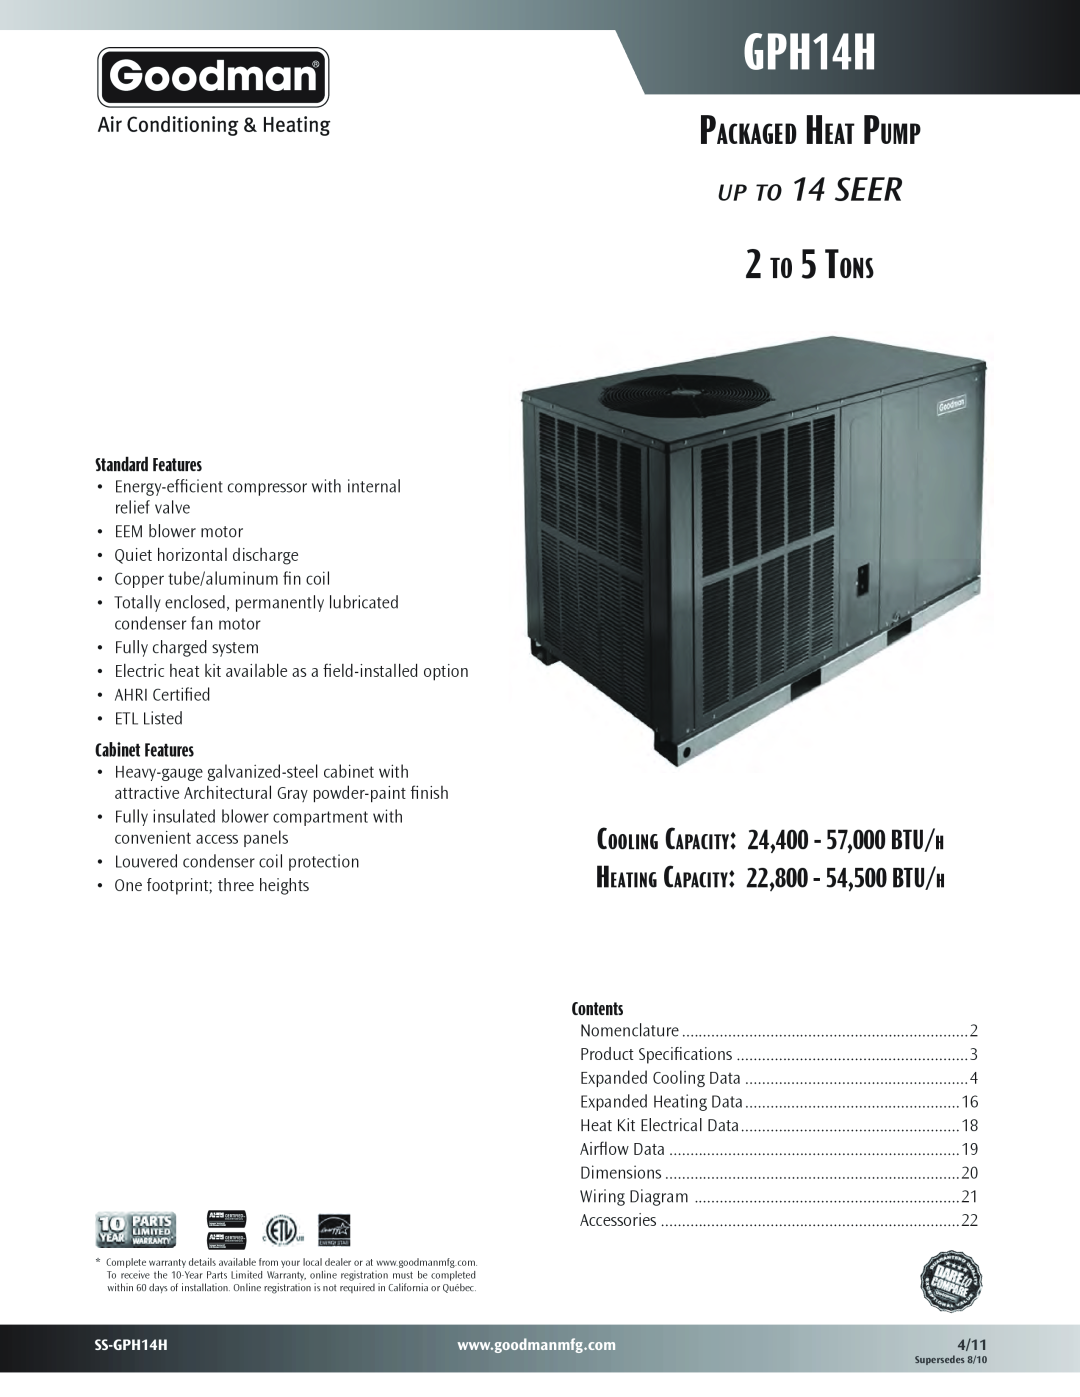 Goodman Mfg Air Conditioning and Heat Pump Packaged Units manual GPC14H and GPH14H, UPTO 14 SEER 